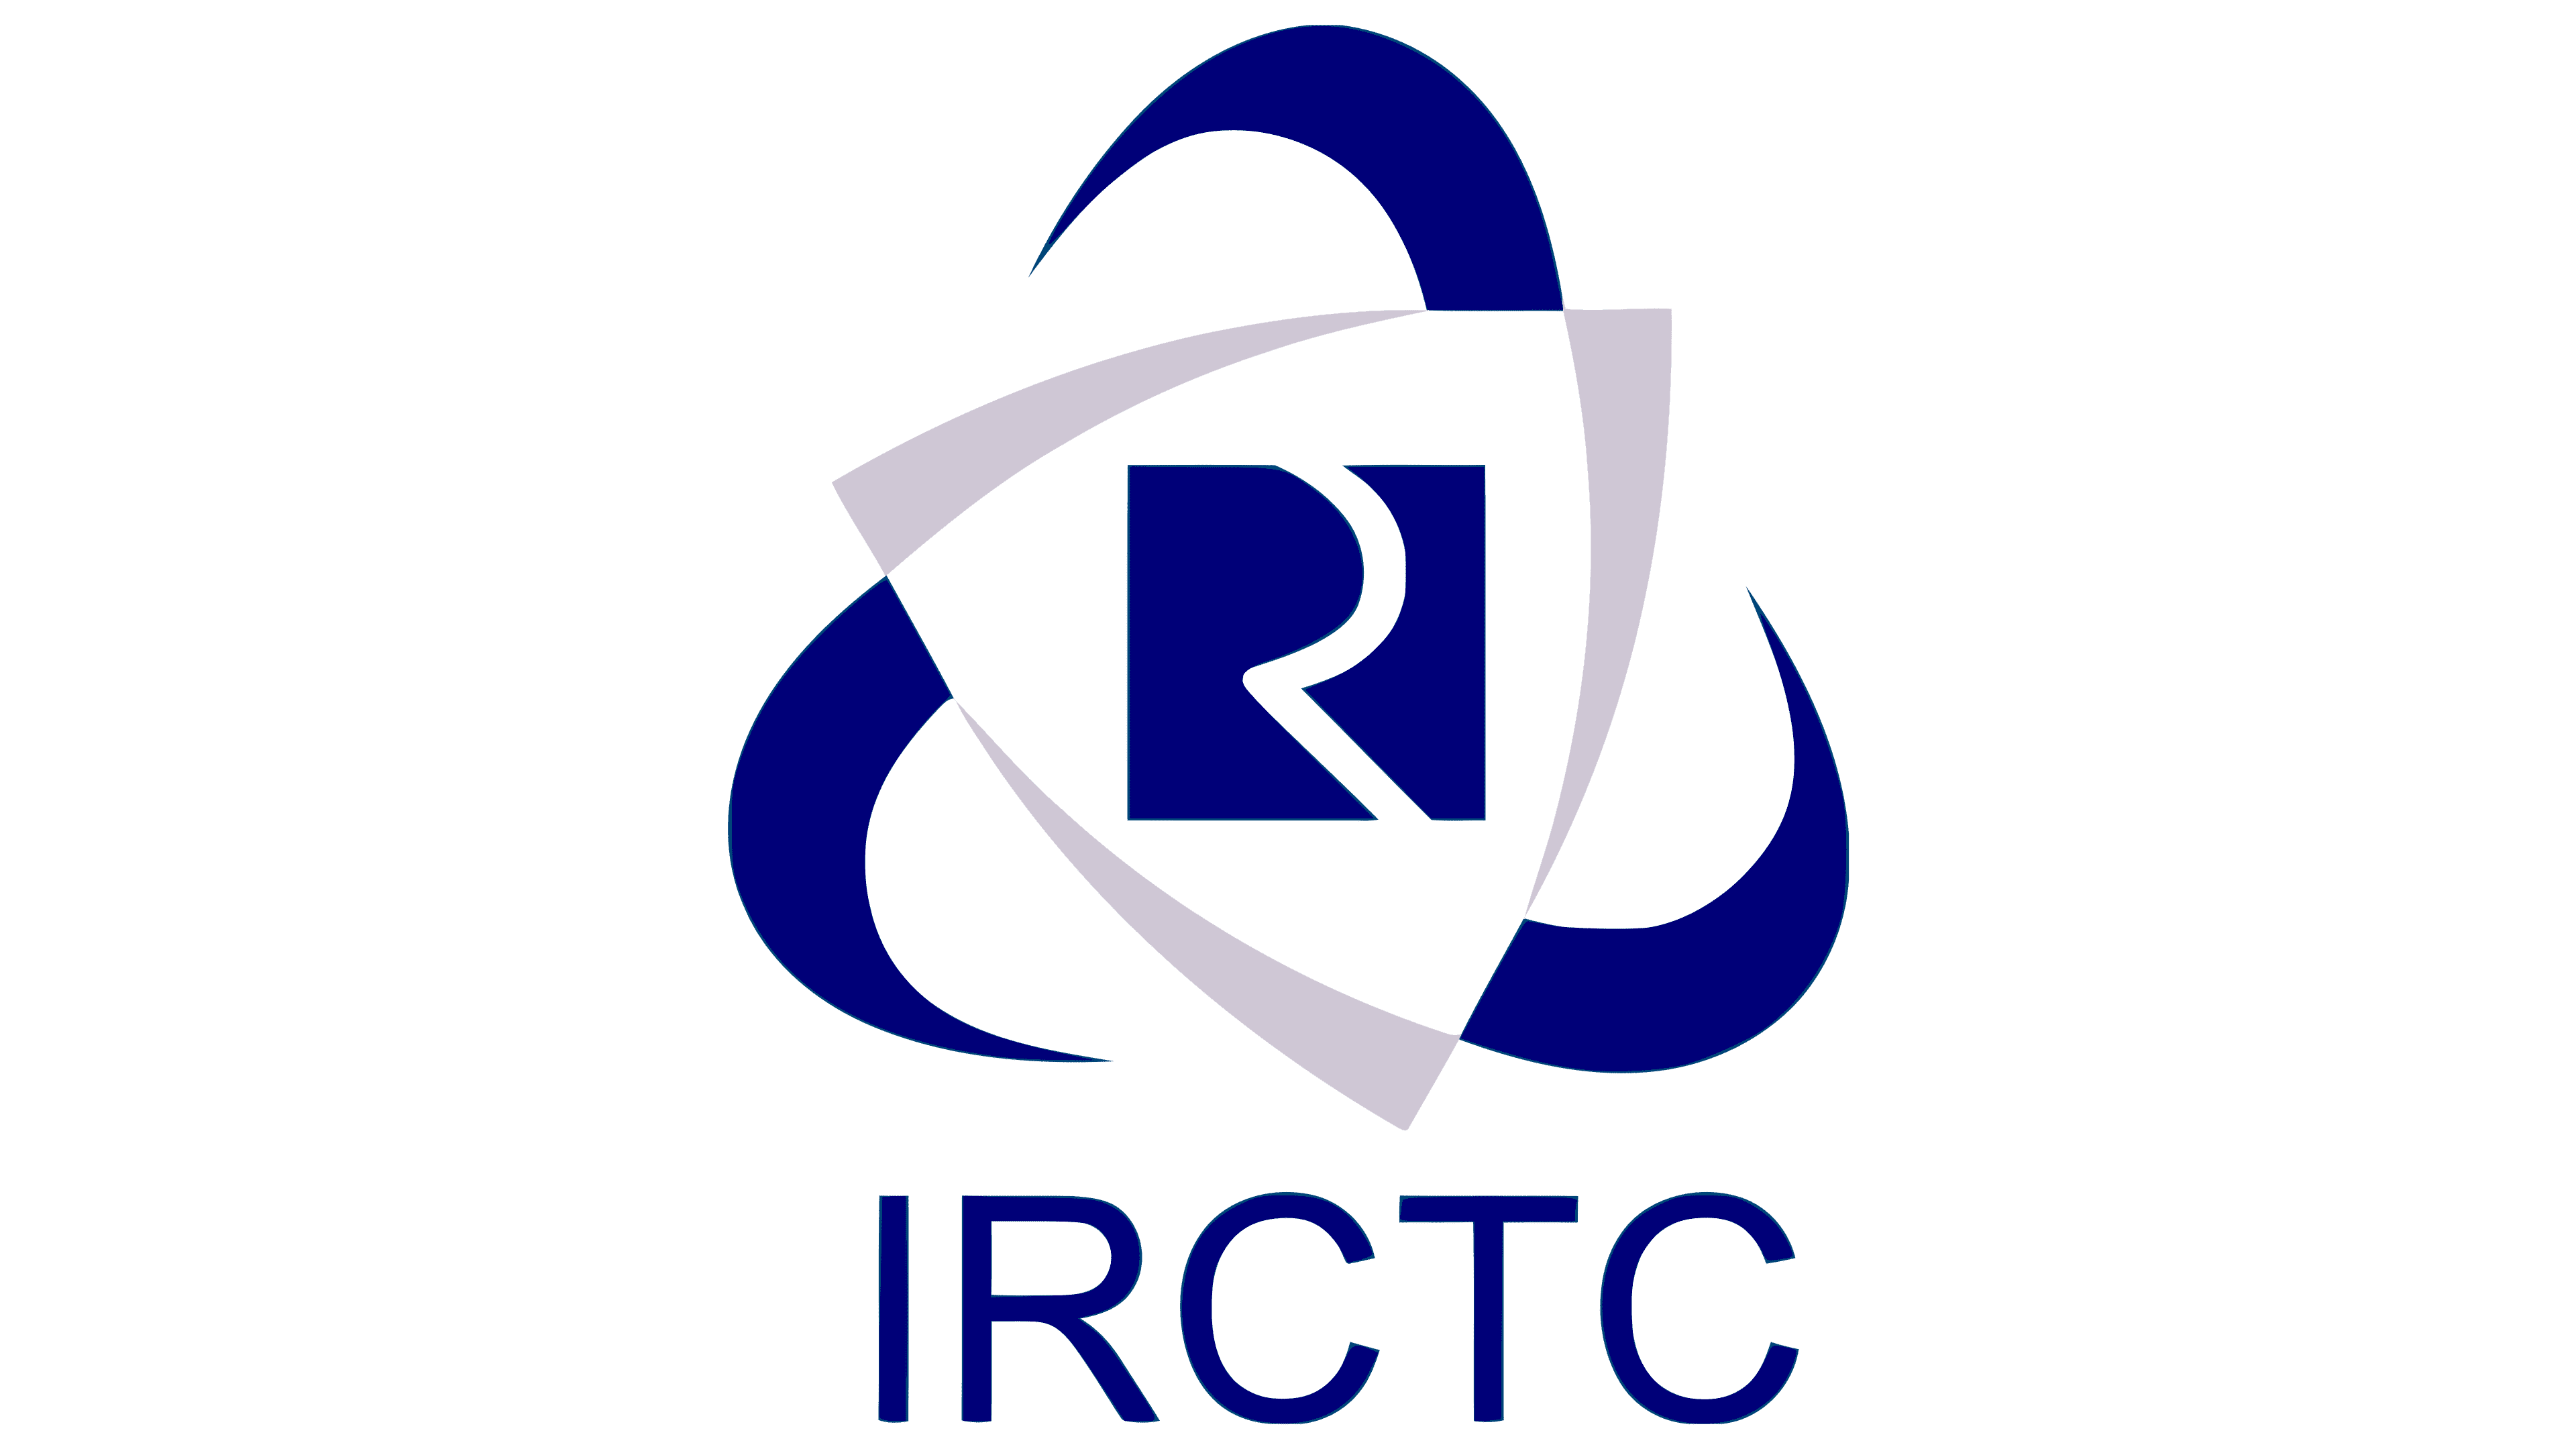 indian railway catering and tourism corporation (irctc)